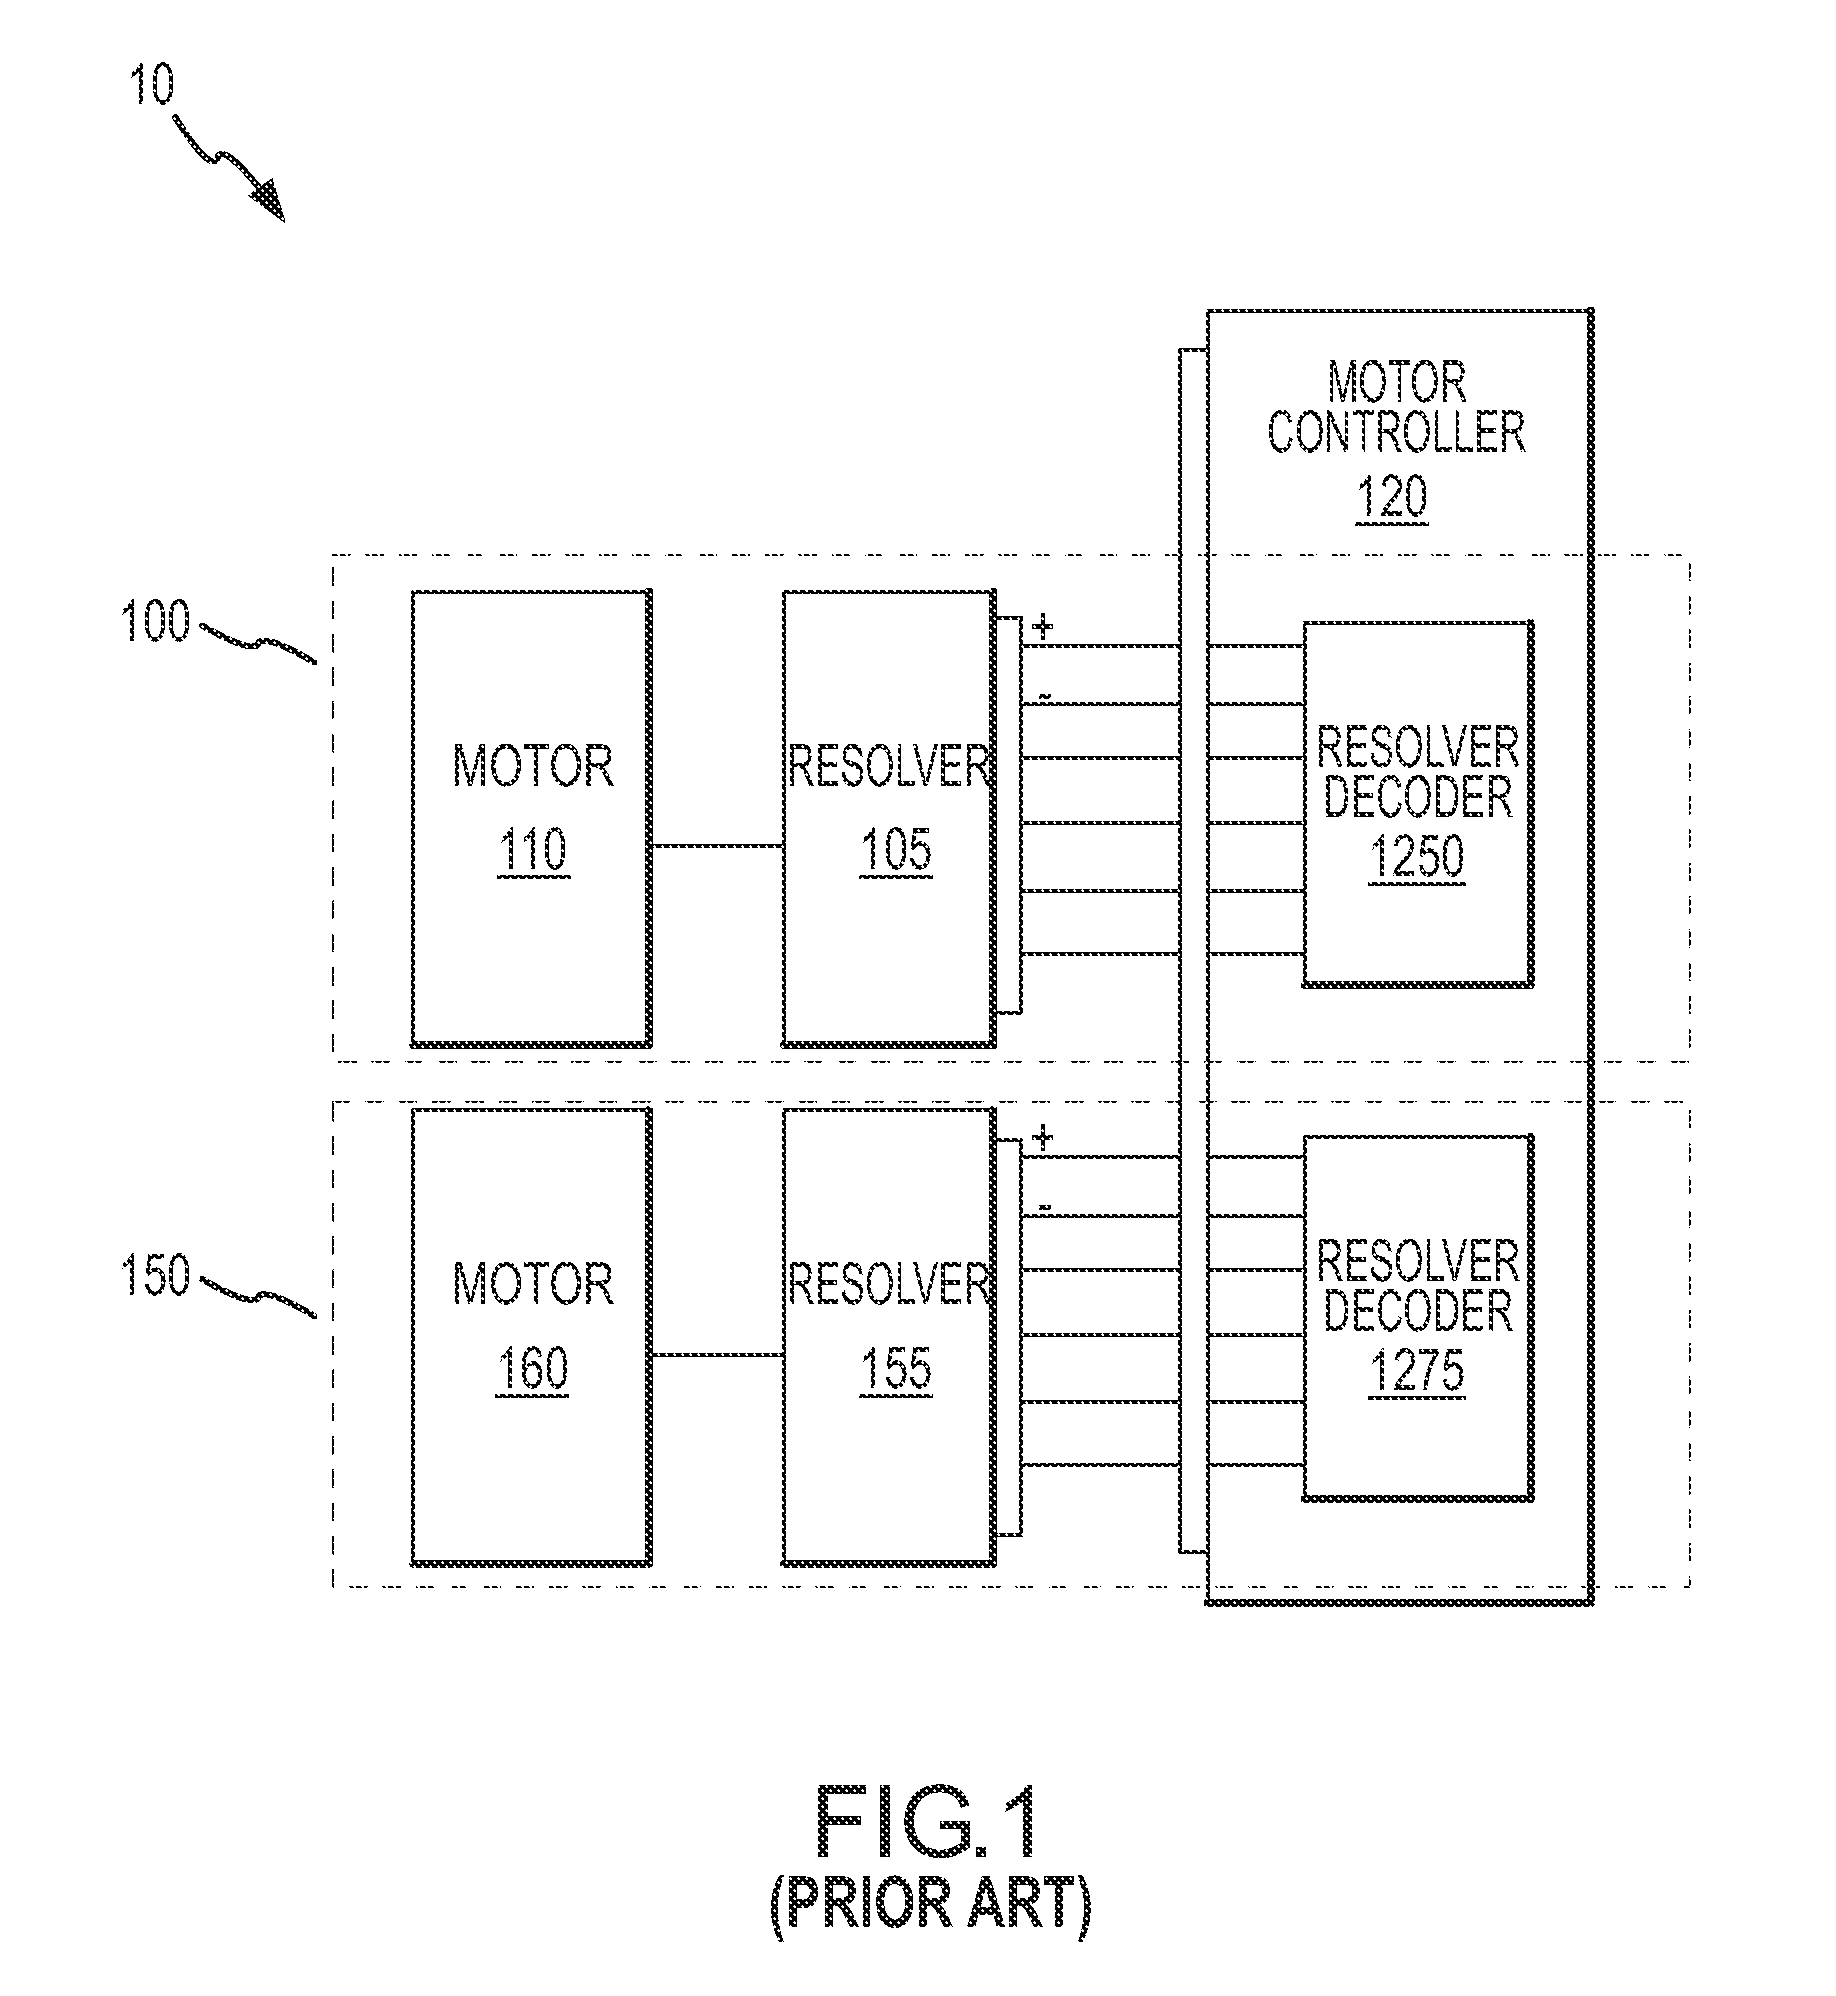 Apparatus and mehtods for diagnosing motor-resolver system faults